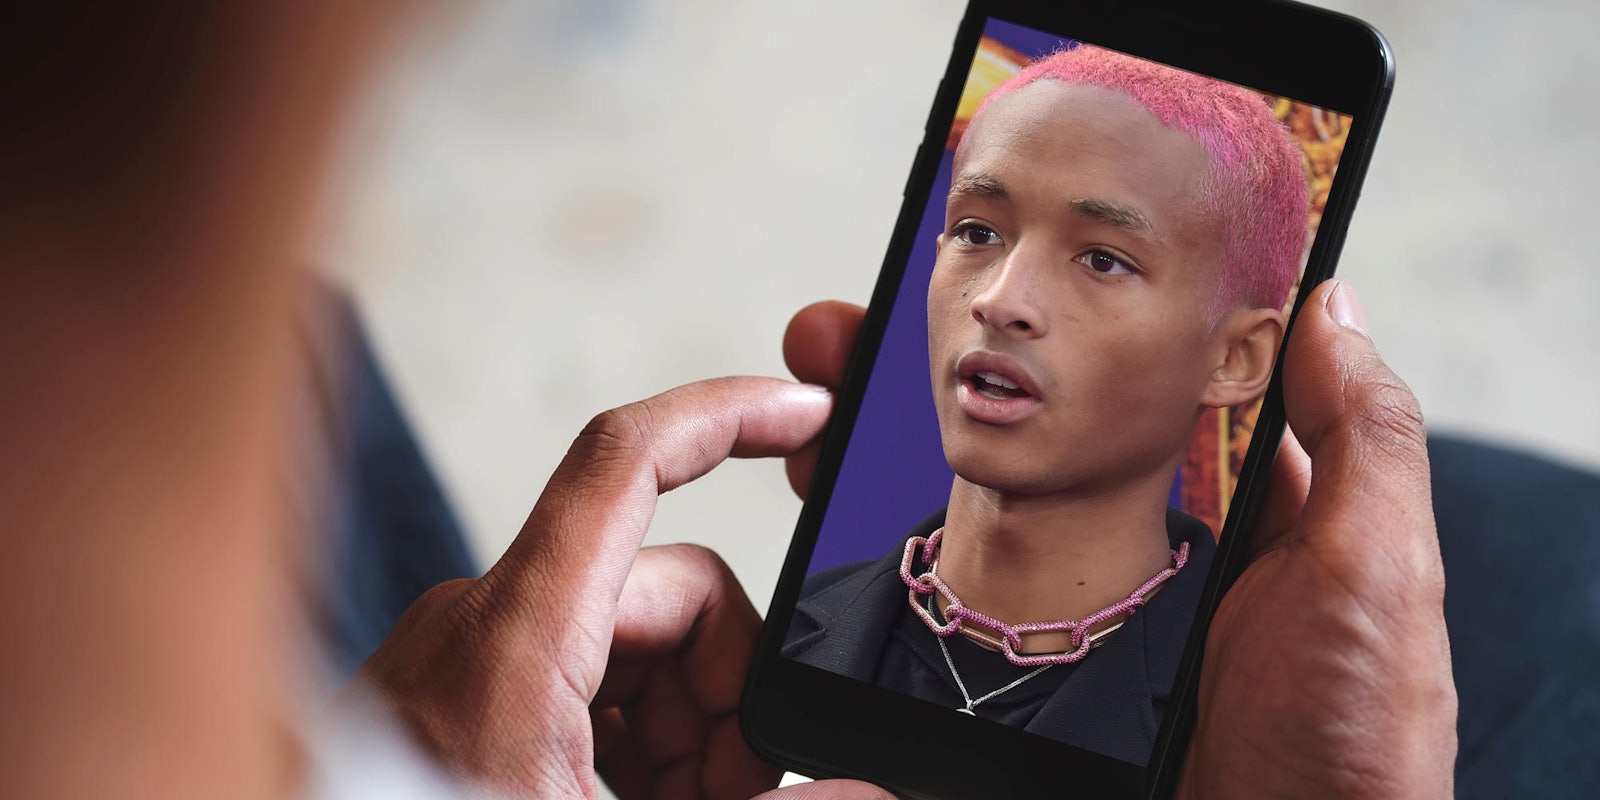 man holding smartphone with jaden smith displayed on the screen